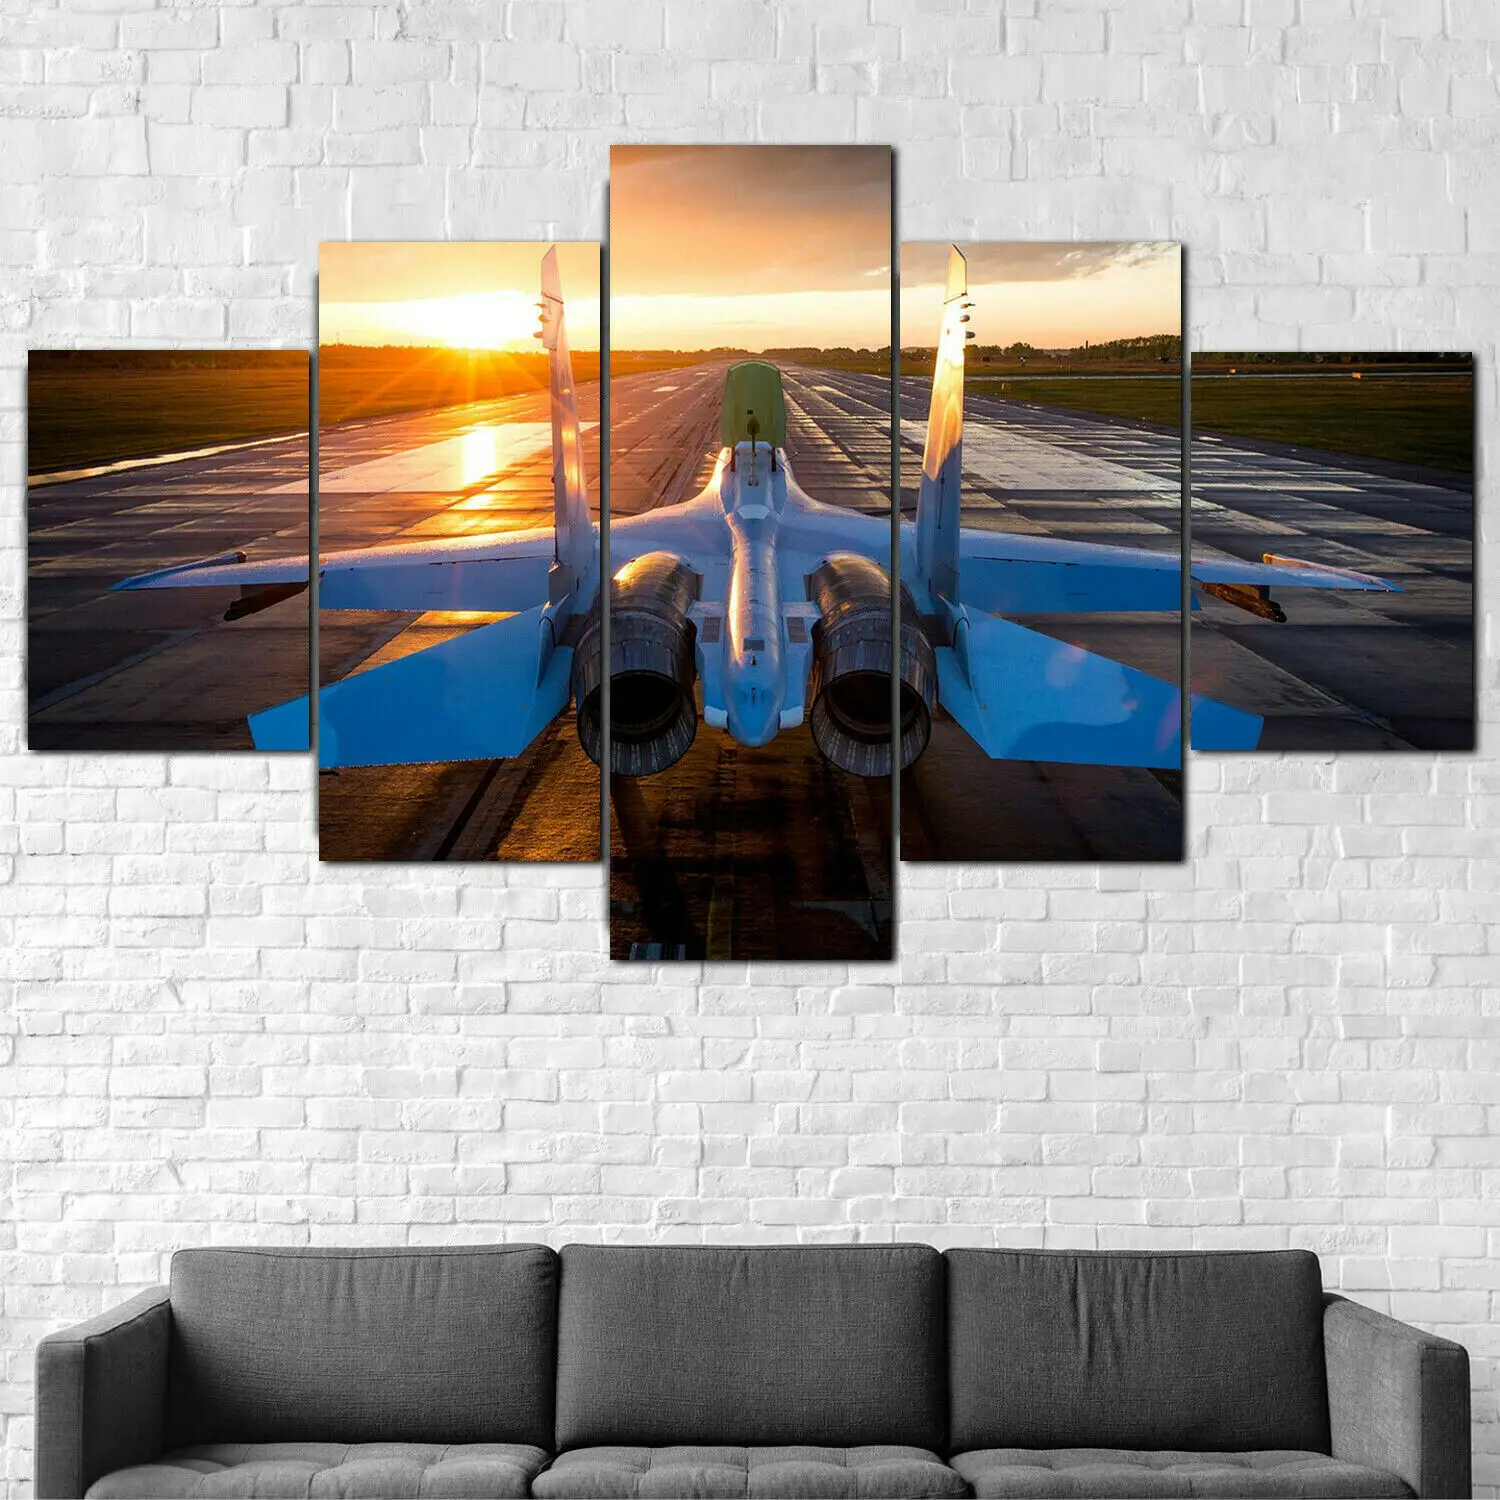 

No Framed Jet Fighter Military Aircraft Poster 5 Panel Canvas Picture Print Wall Art Canvas Painting Wall Decor for Living Room